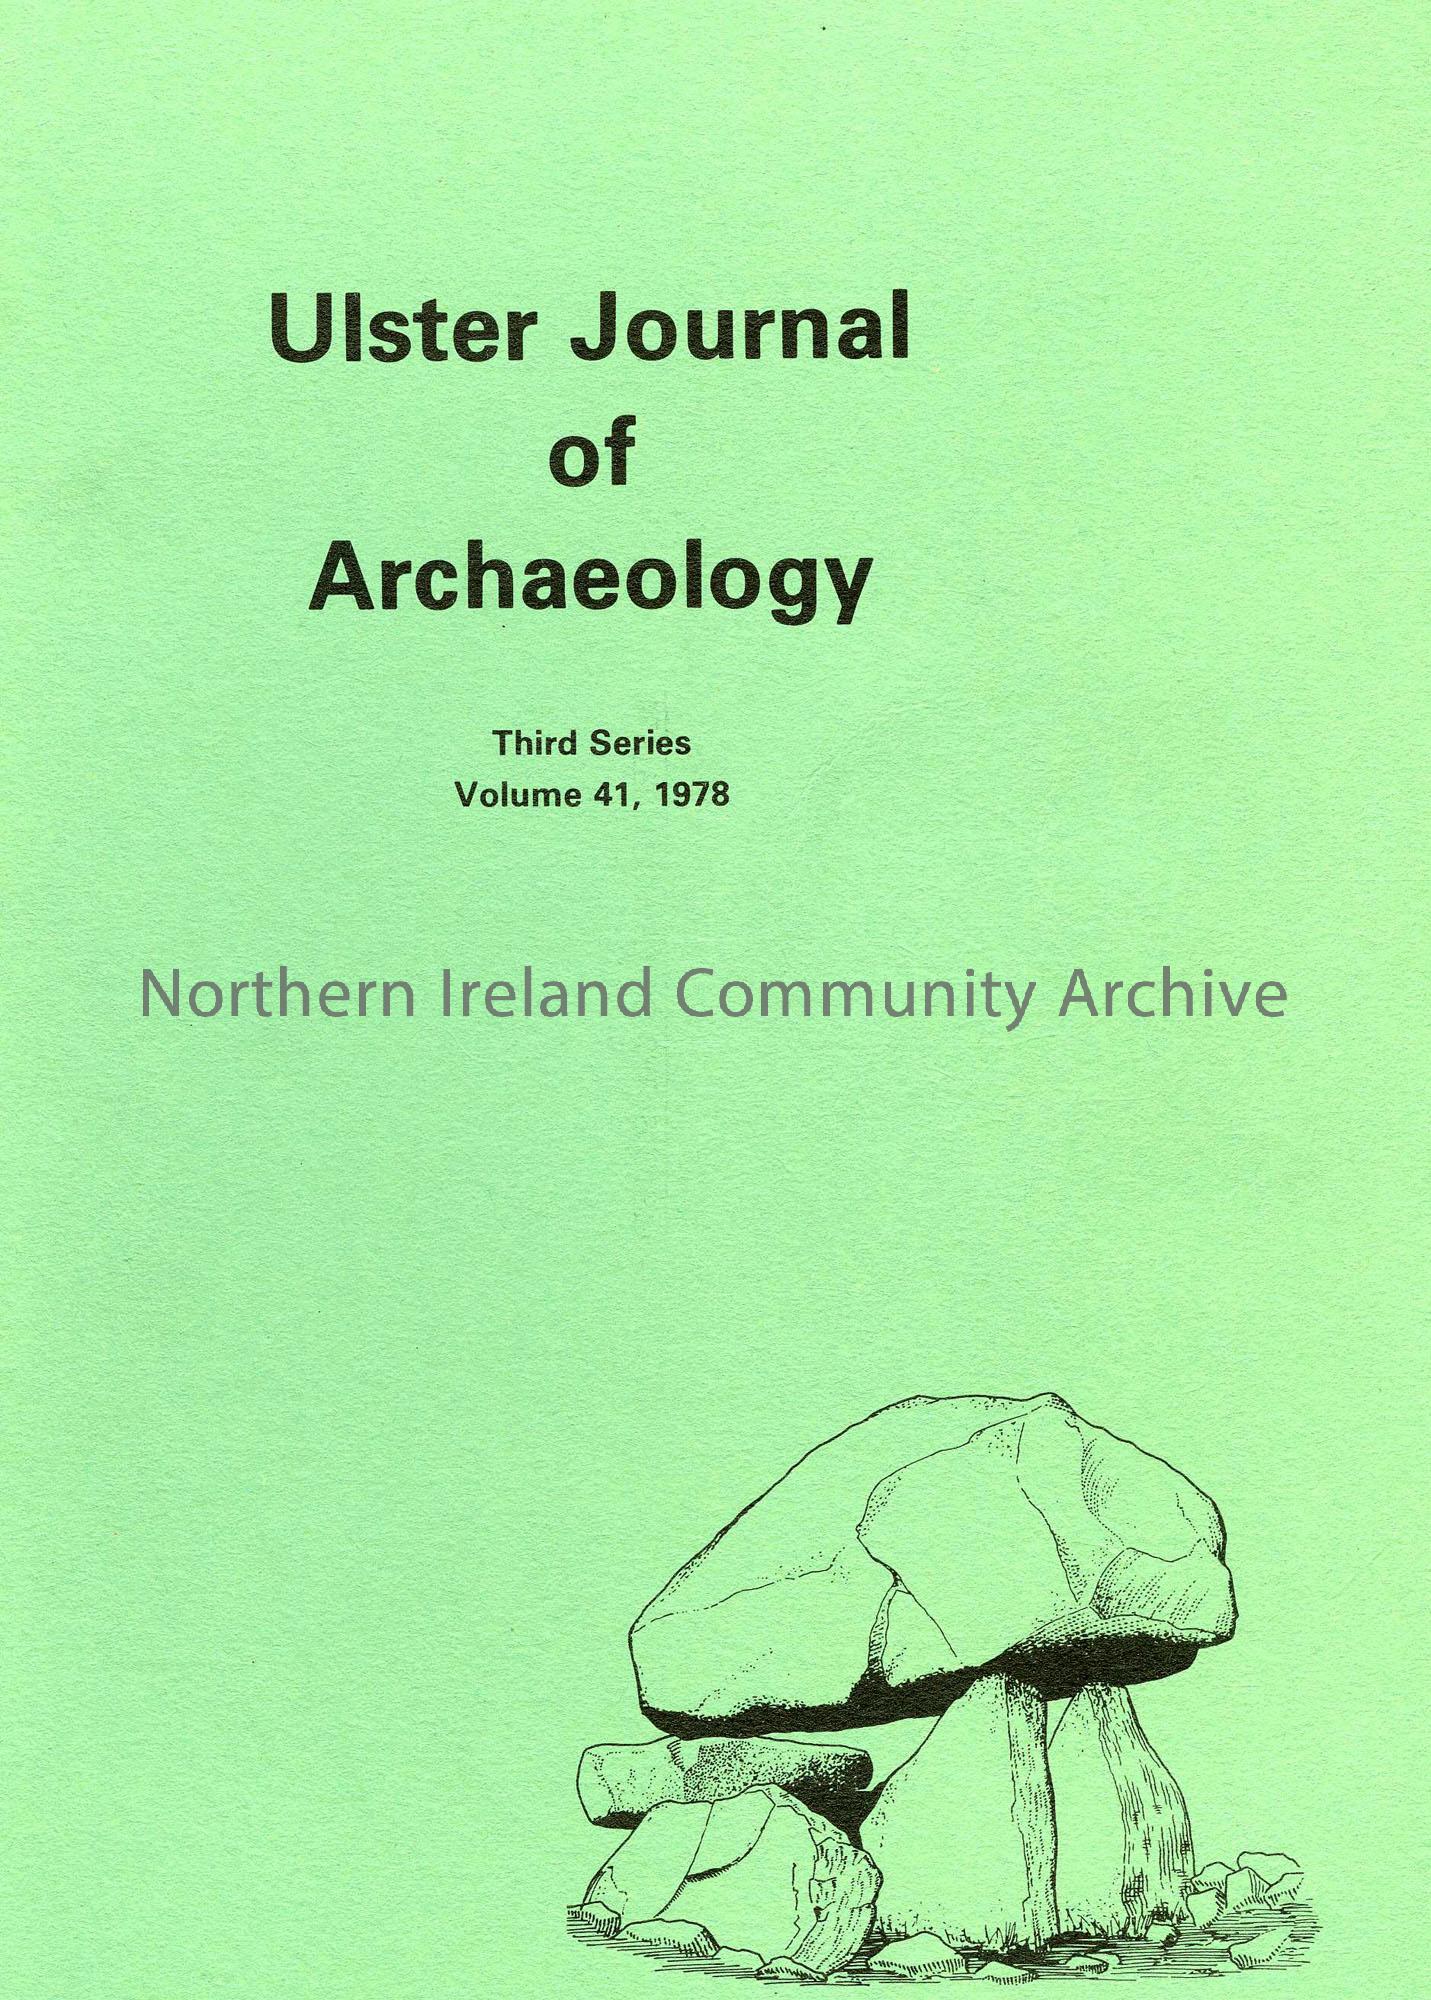 book titled, Ulster Journal of Archaeology. Third Series Volume 41, 1978 (1586)